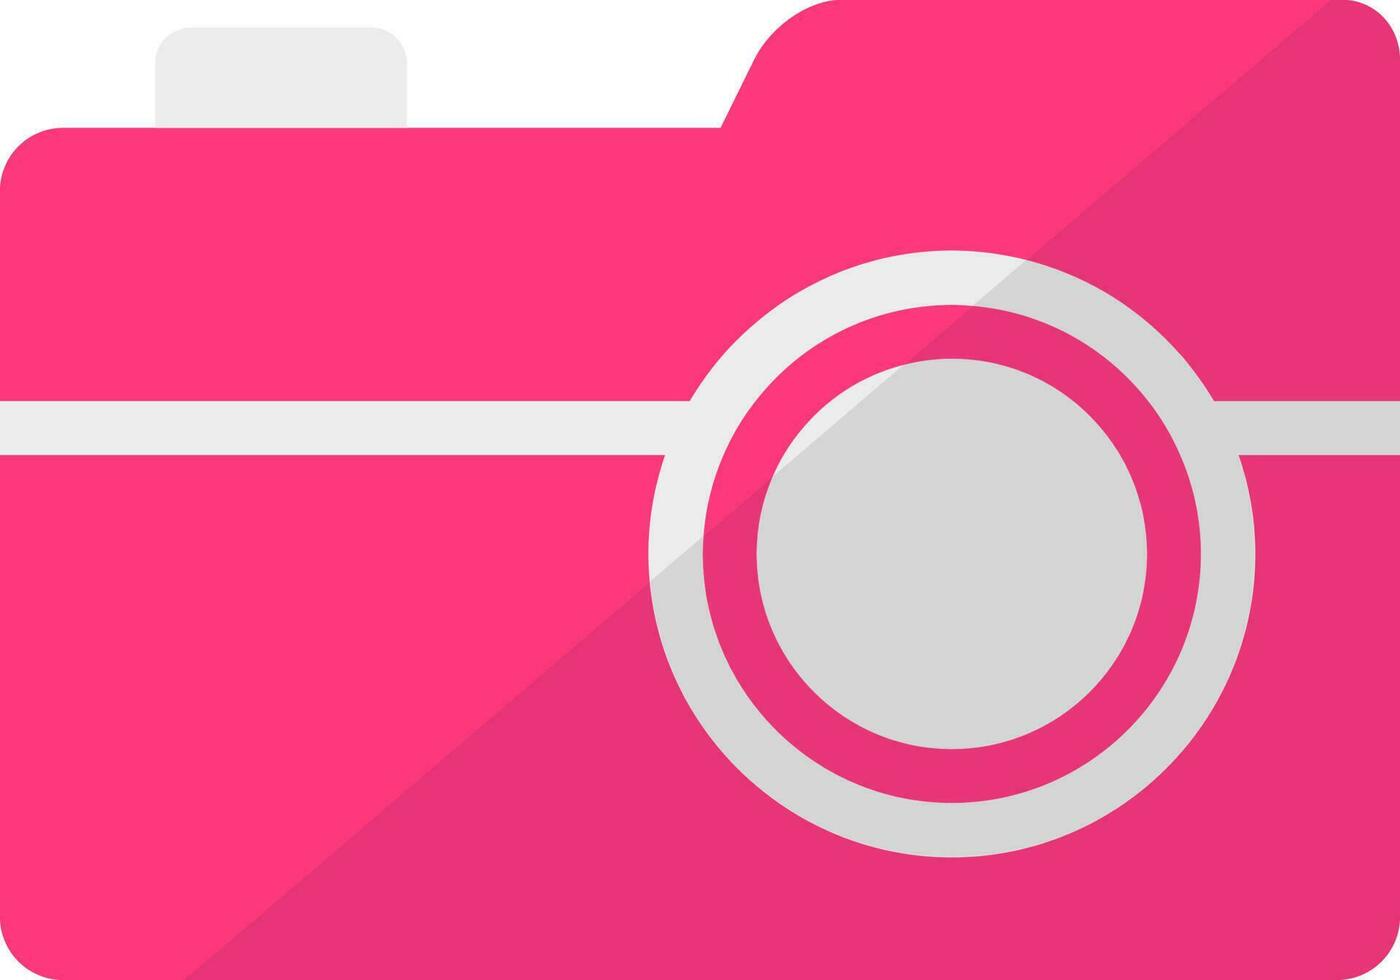 Digital camera icon in pink and gray color. vector